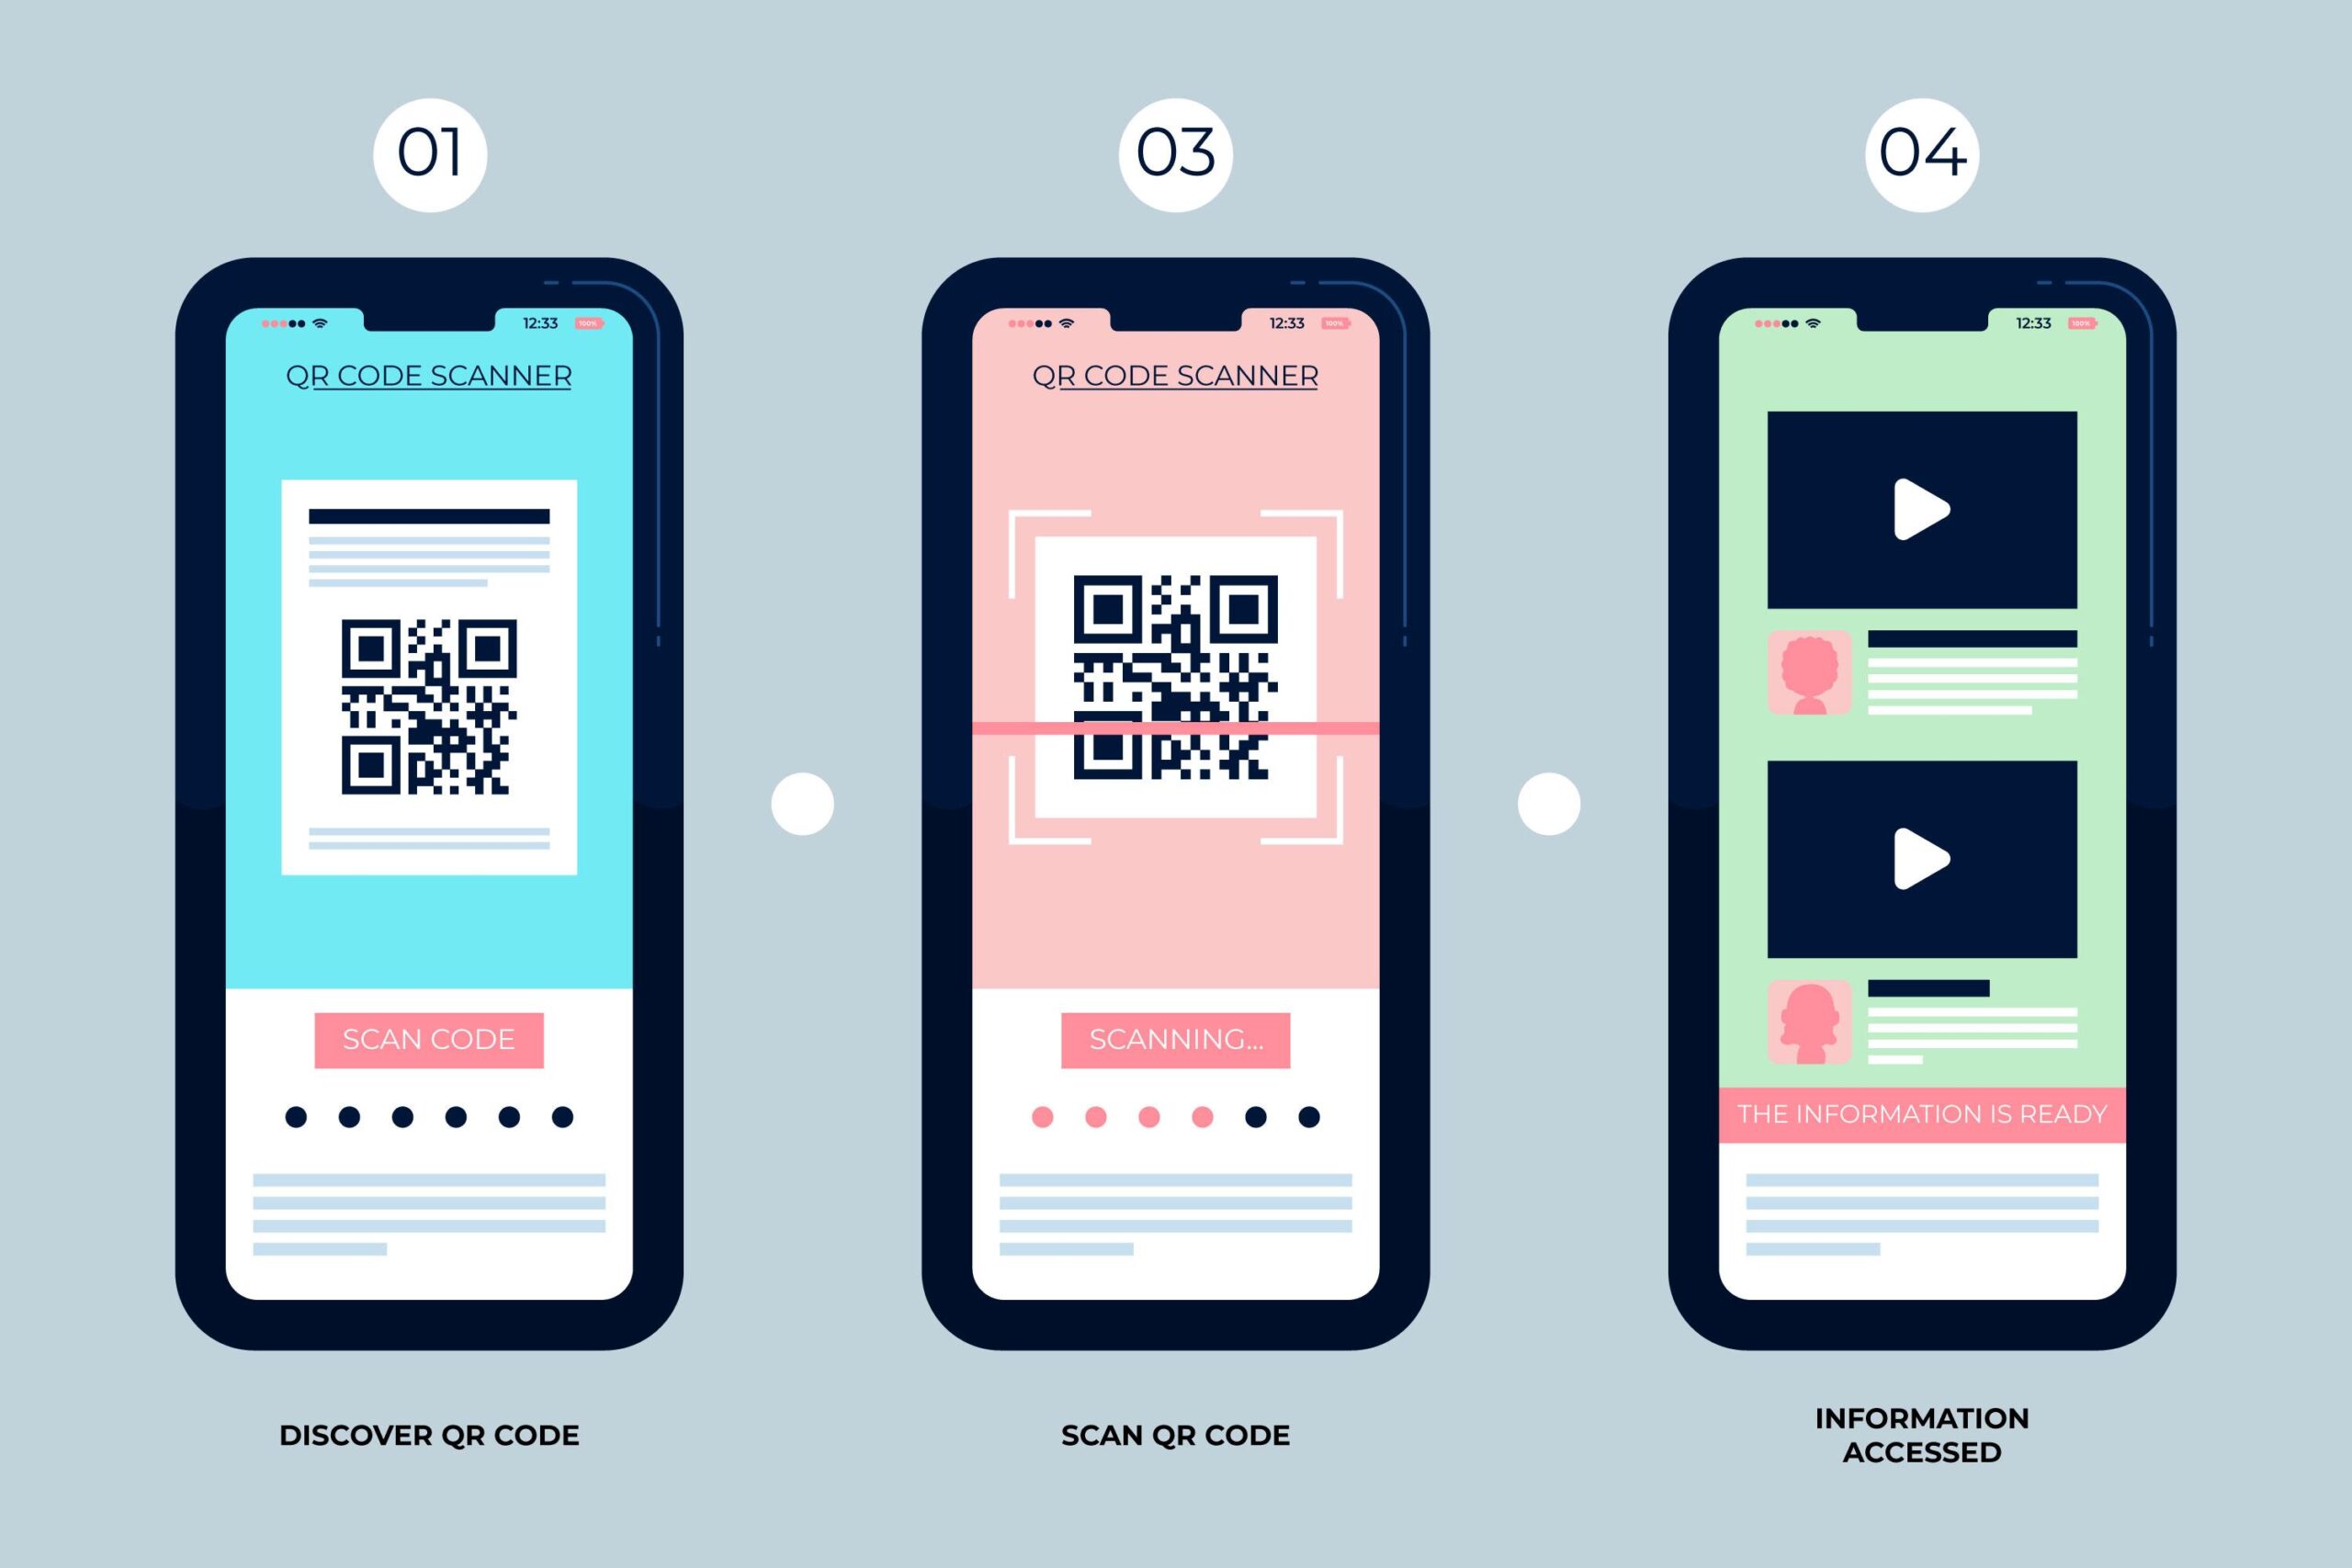 How to Scan a QR Code from a Screenshot